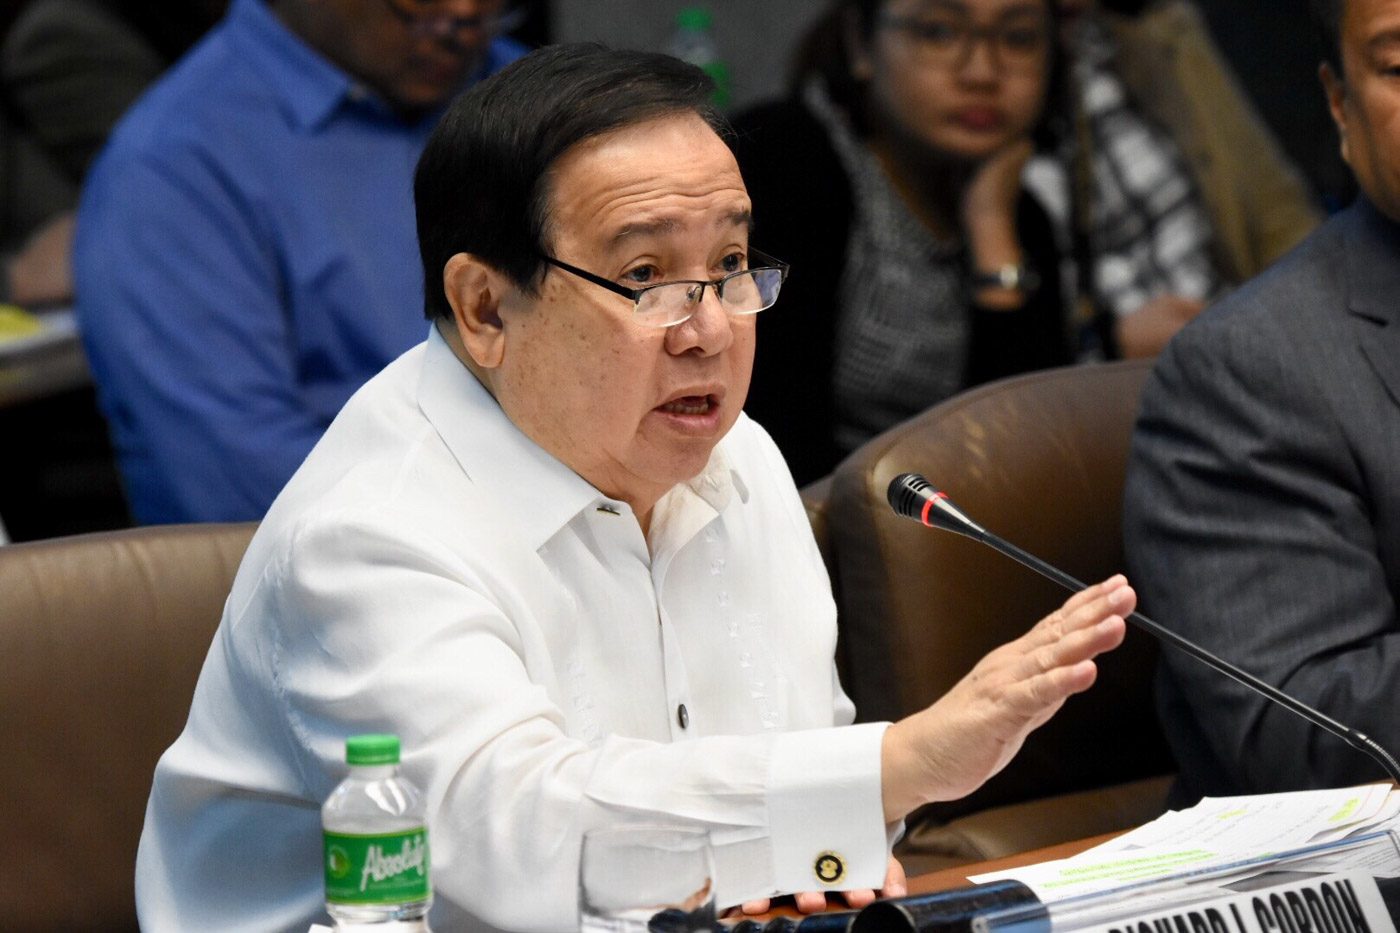 Gordon report: File criminal charges vs Aquino, Garin, Abad over Dengvaxia mess